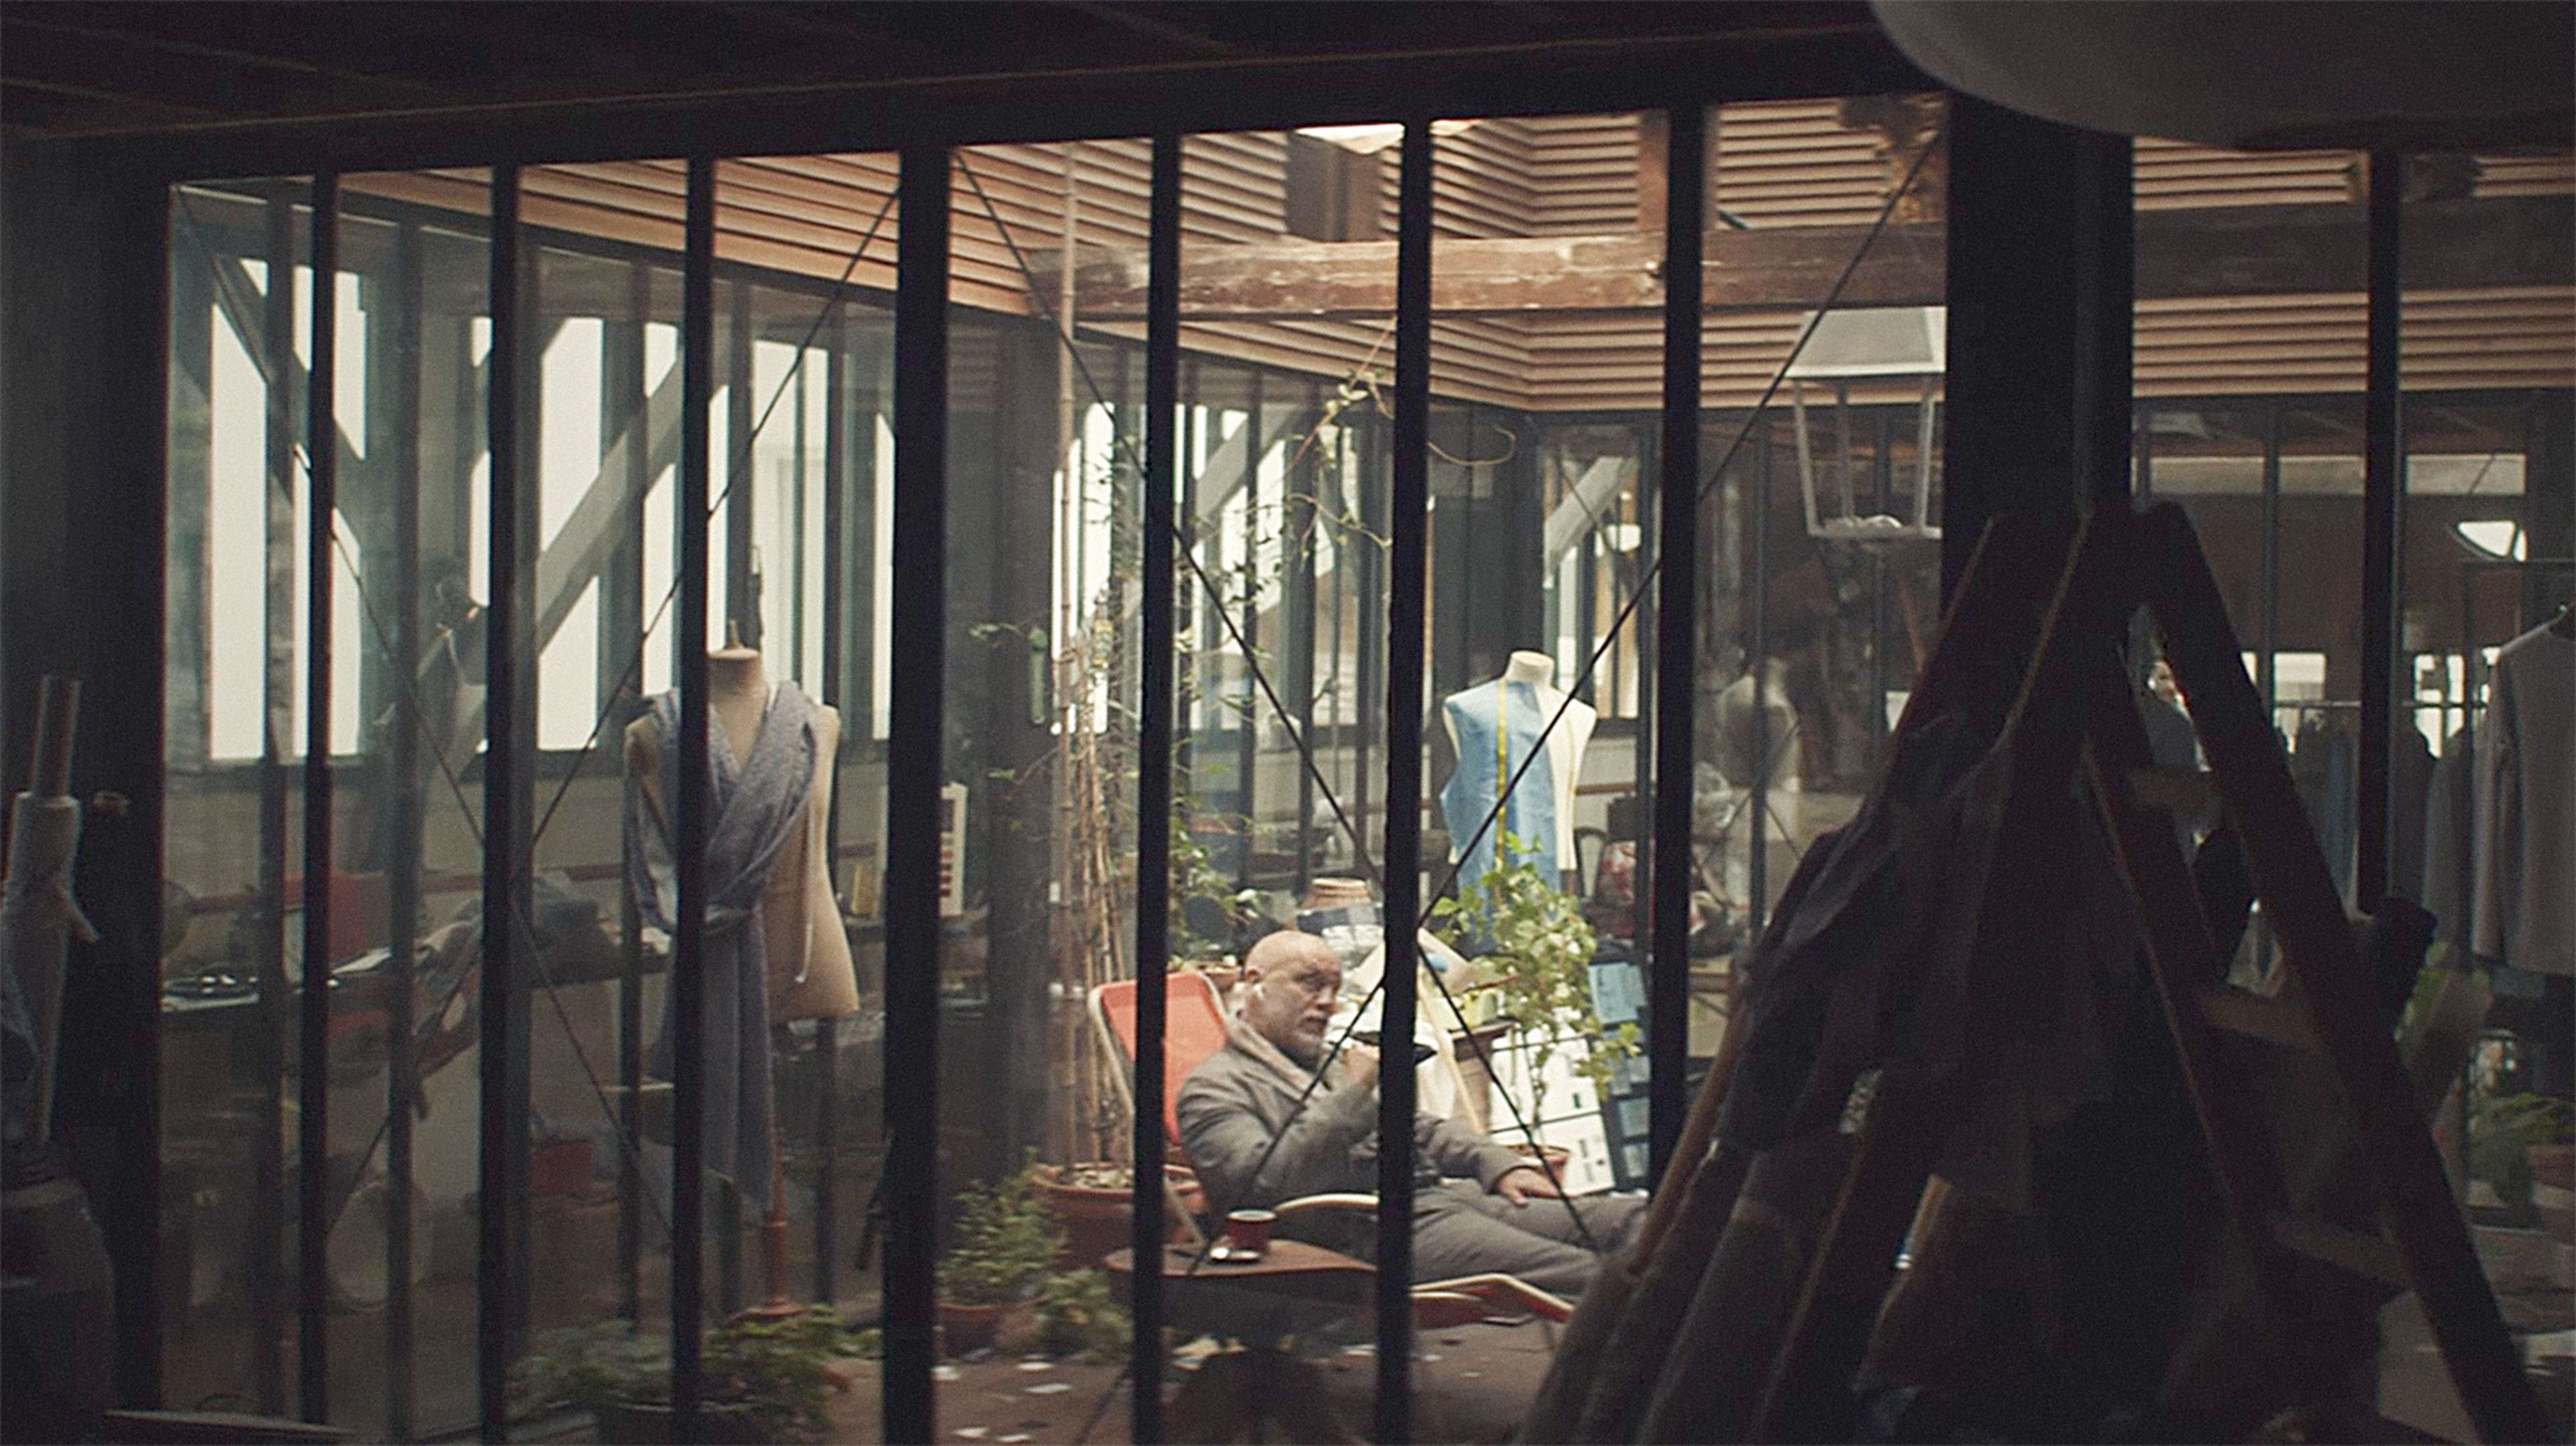 Squarespace’s Super Bowl Ad Starring John Malkovich Wins Best Ad Emmy